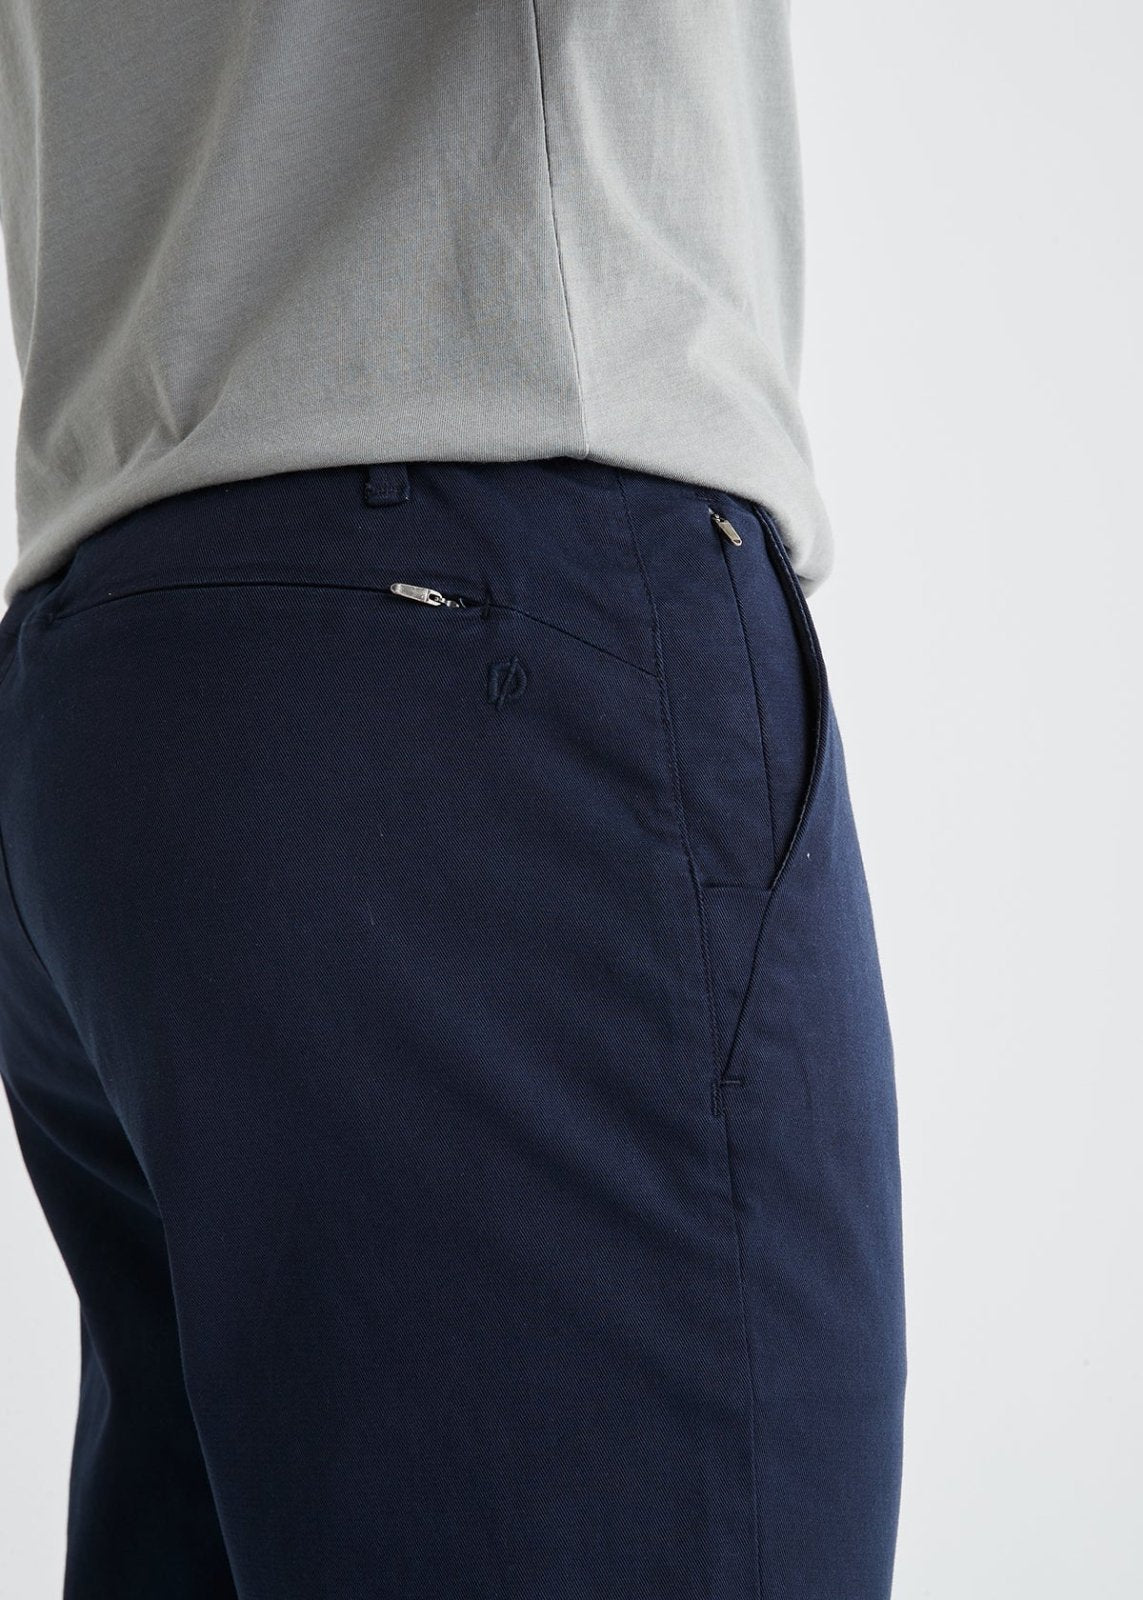 mens stretch deep blue chino pants side and back zip pockets